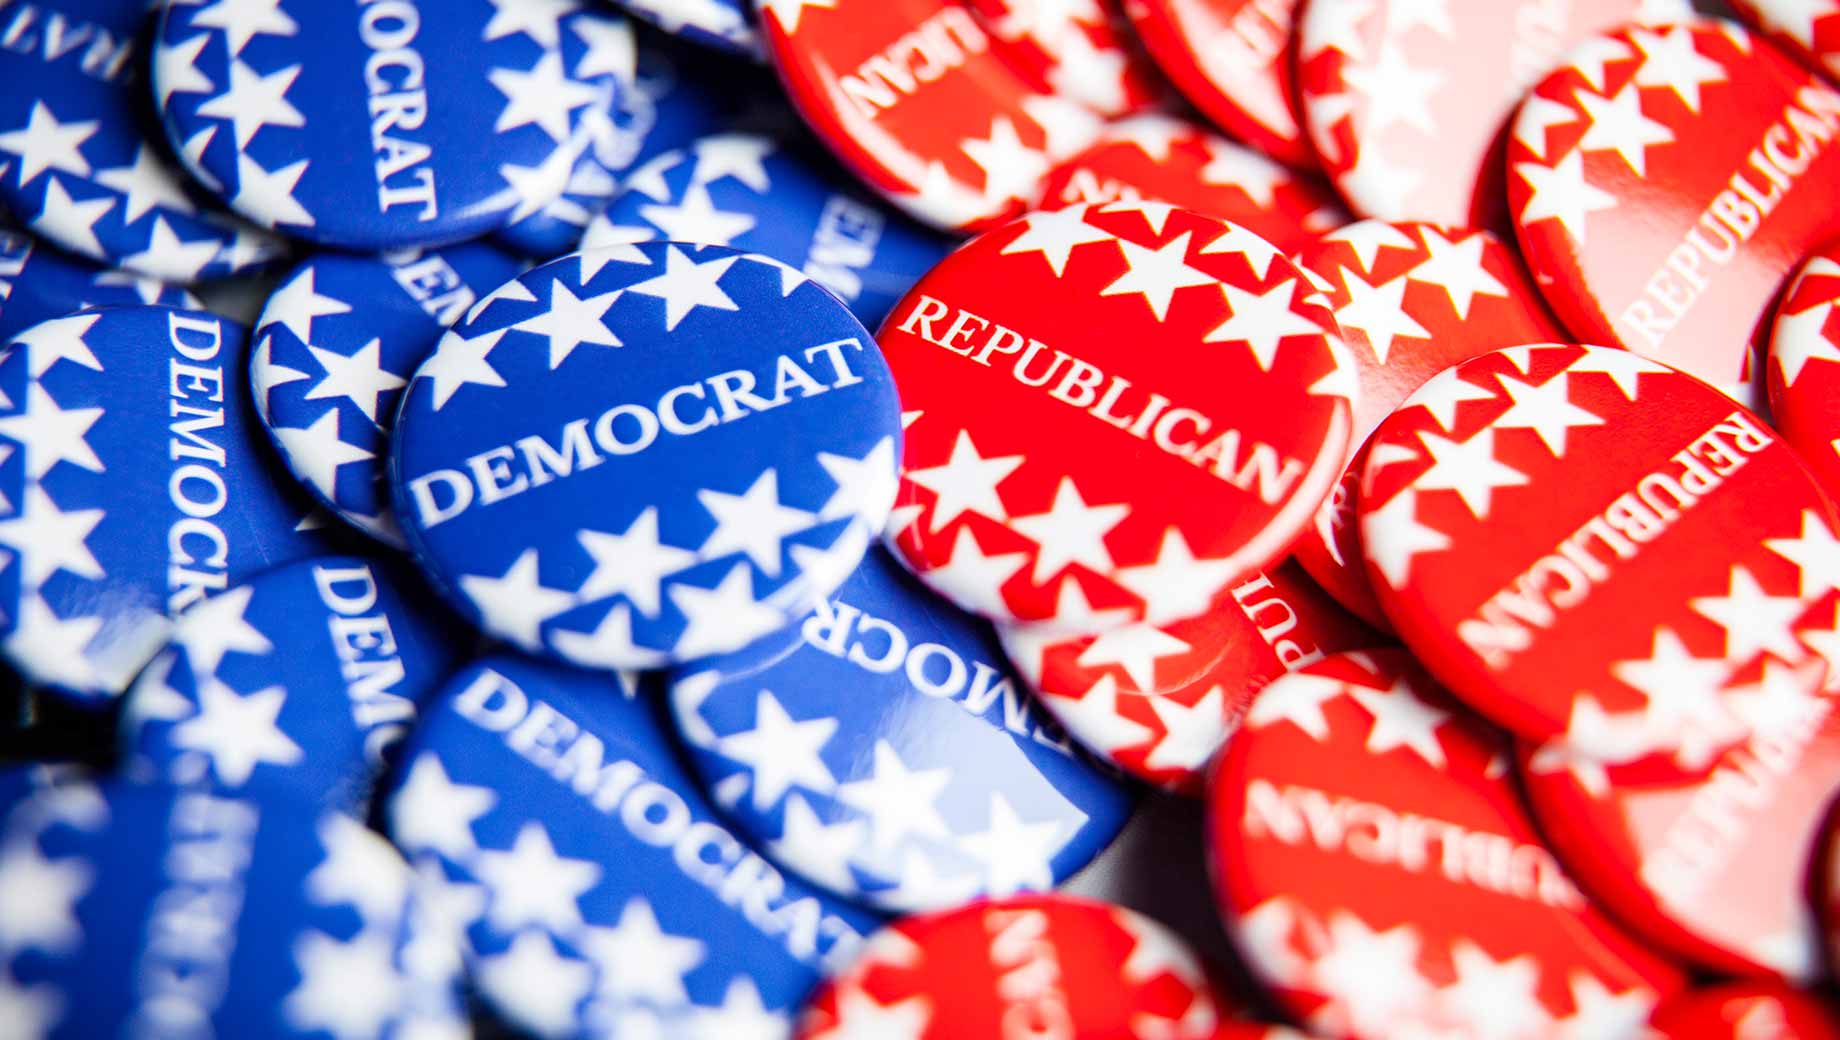 Why is red for Republicans and blue for Democrats?